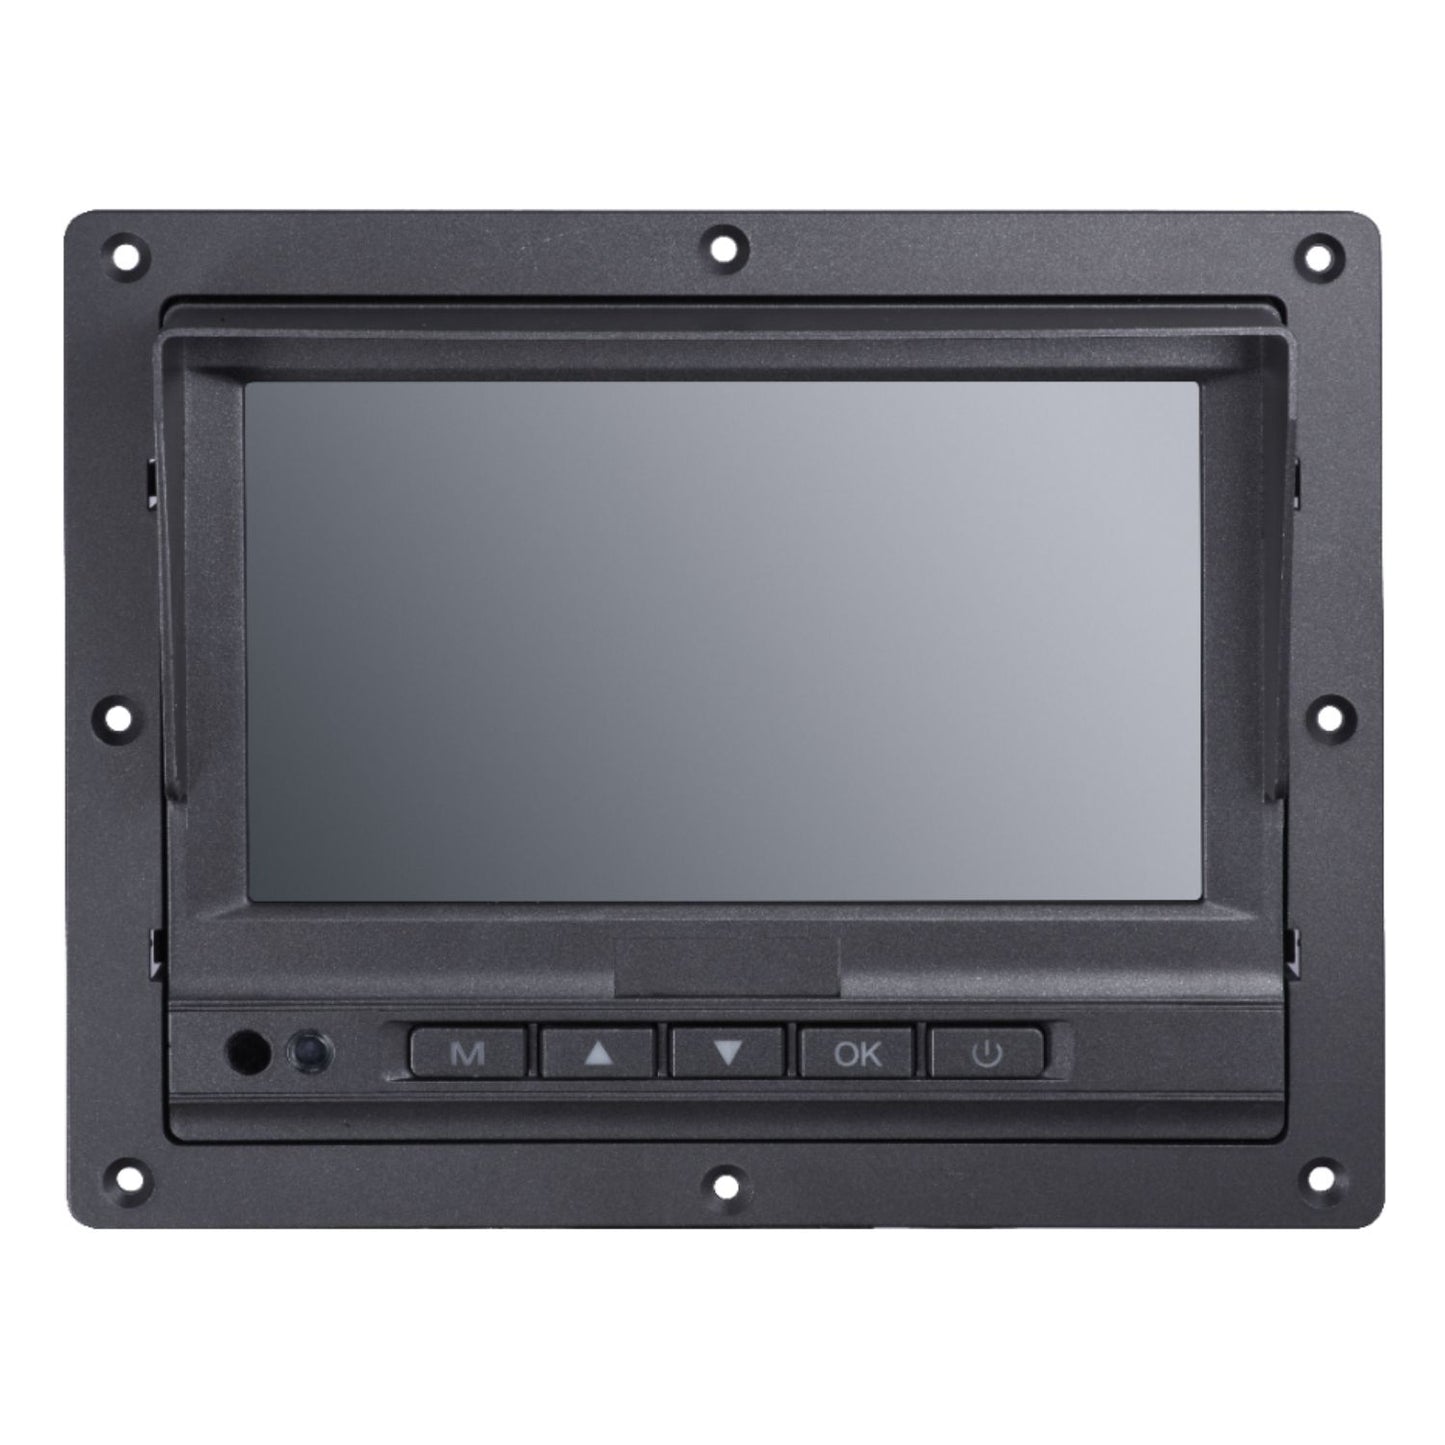 DS-MP1302 - 7" TFT Touchscreen LCD Monitor, Embedded/Bracket Mounting